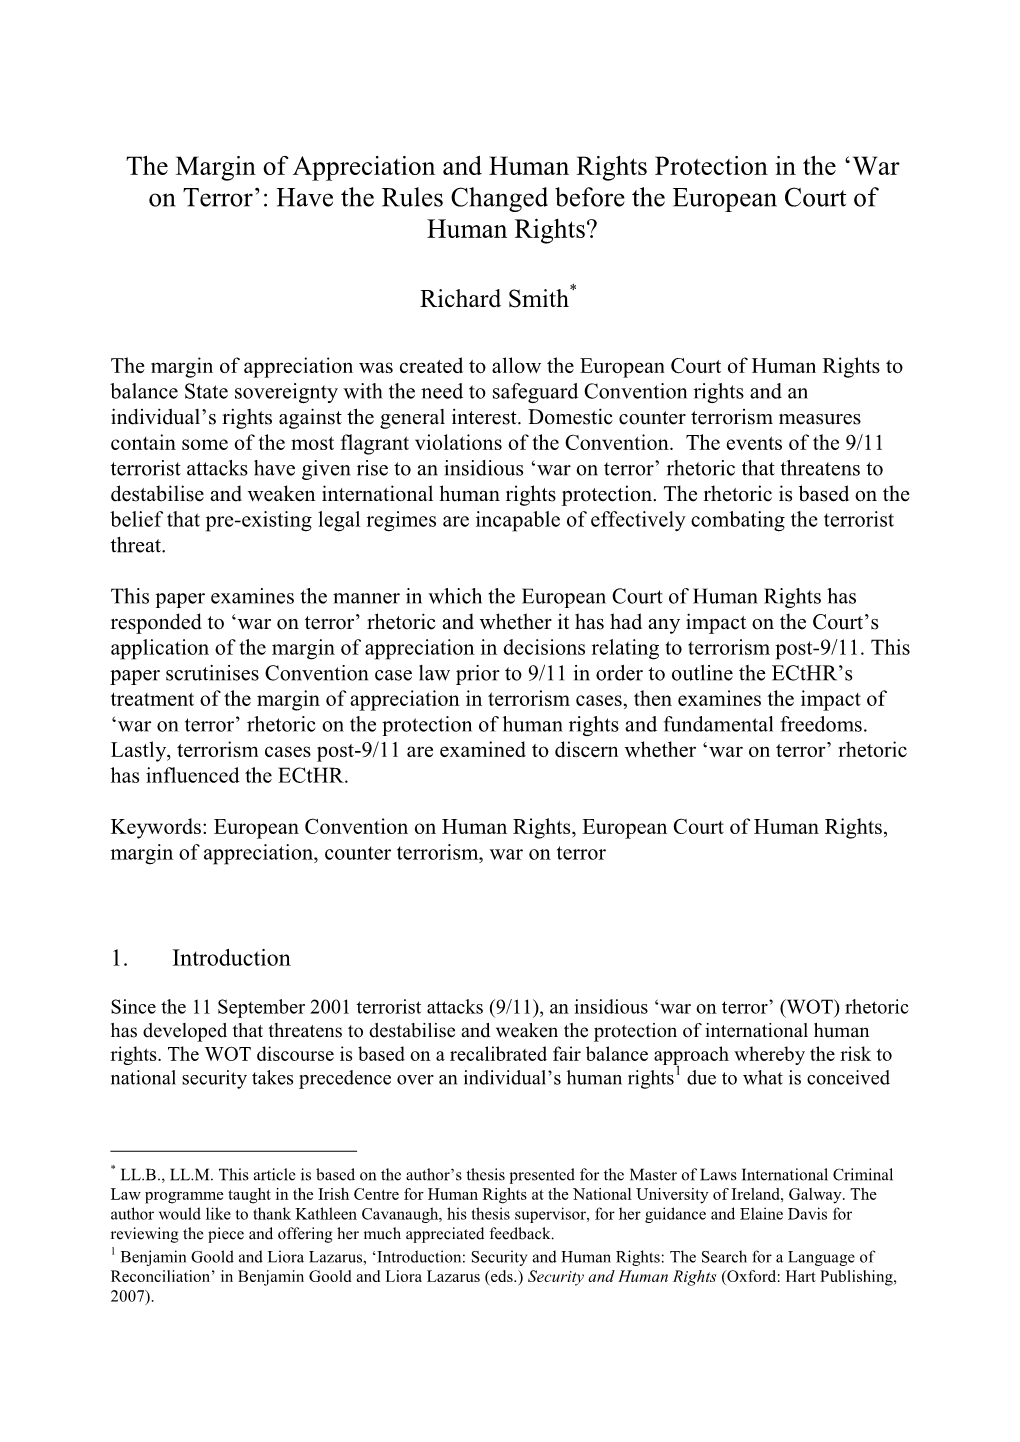 The Margin of Appreciation and Human Rights Protection in the „War on Terror‟: Have the Rules Changed Before the European Court of Human Rights?